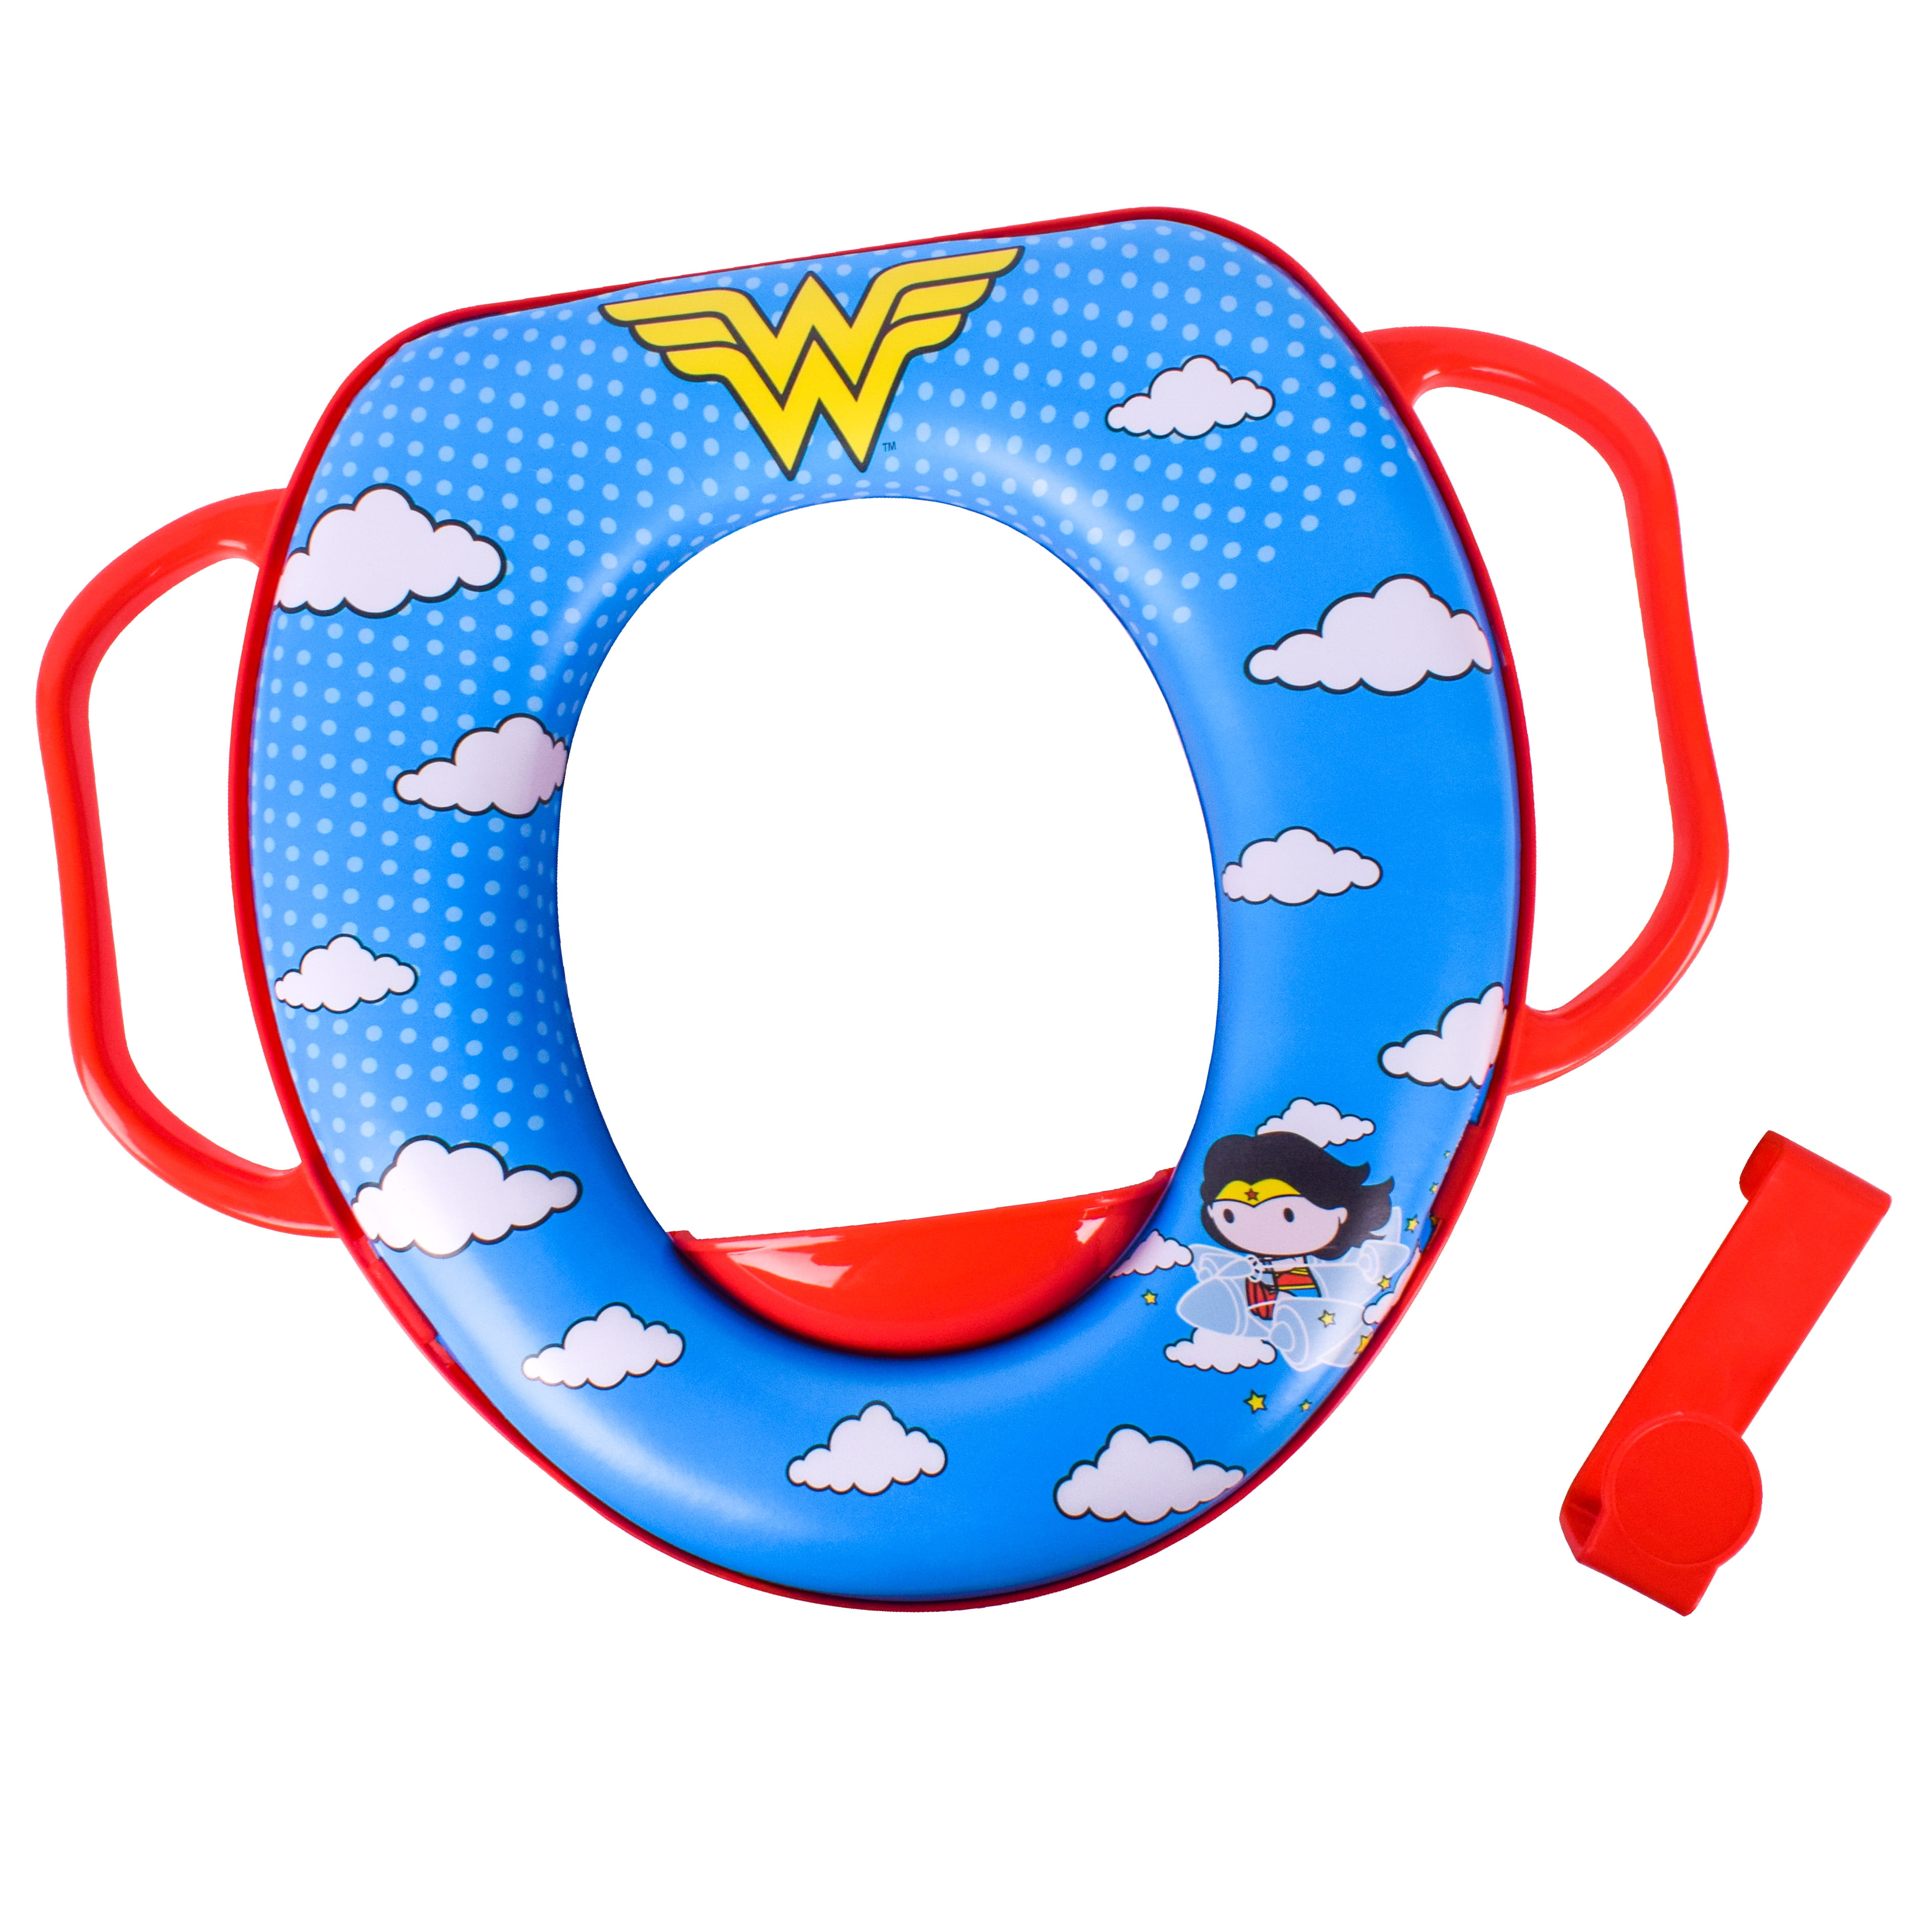 DC Comics Wonder Women Soft Potty Training Seat with Storage Hook and Handles for Toddlers 12 Months and Older, Unisex